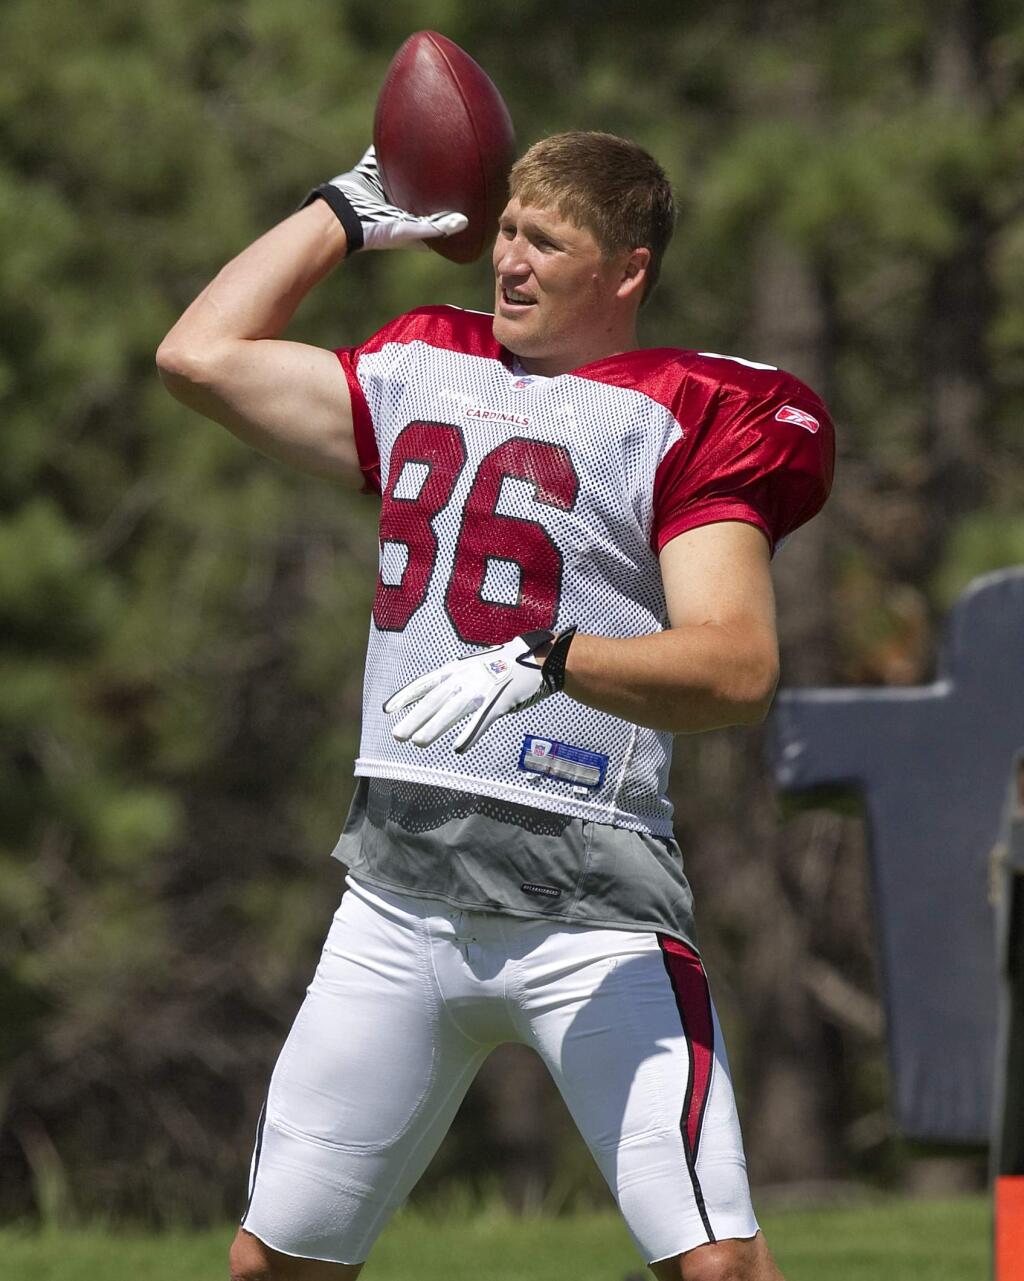 In this Aug. 4, 2011 file photo, the Arizona Cardinals' Todd Heap warms up at training camp in Flagstaff, Ariz. Police say Heap was behind the wheel of the truck when he accidentally struck his 3-year-daughter while moving the vehicle forward outside their home in Mesa Friday, April 14, 2017. Officials said the girl was taken to a hospital where she was pronounced dead. Mesa police said impairment was not a factor. (AP Photo/Matt York)